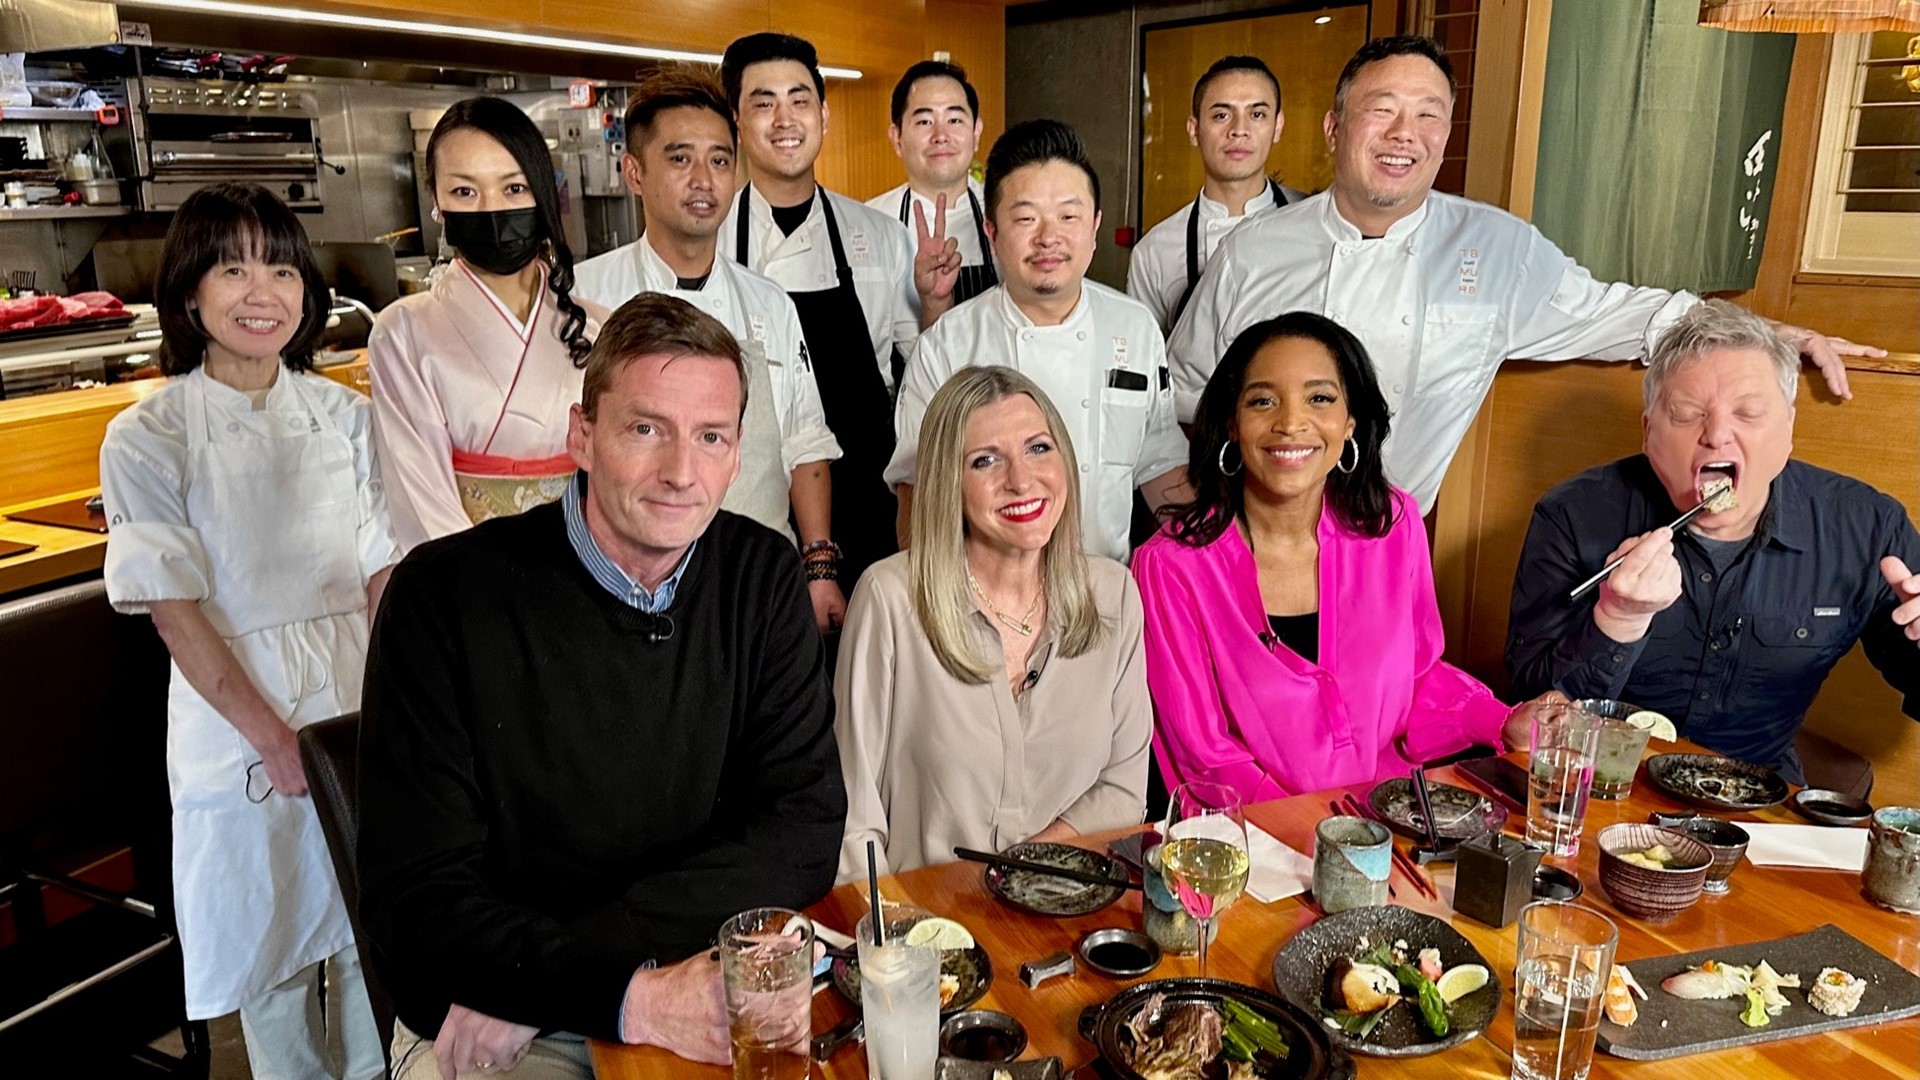 The chef/owner trained under the godfather of Seattle sushi, Shiro. #k5evening